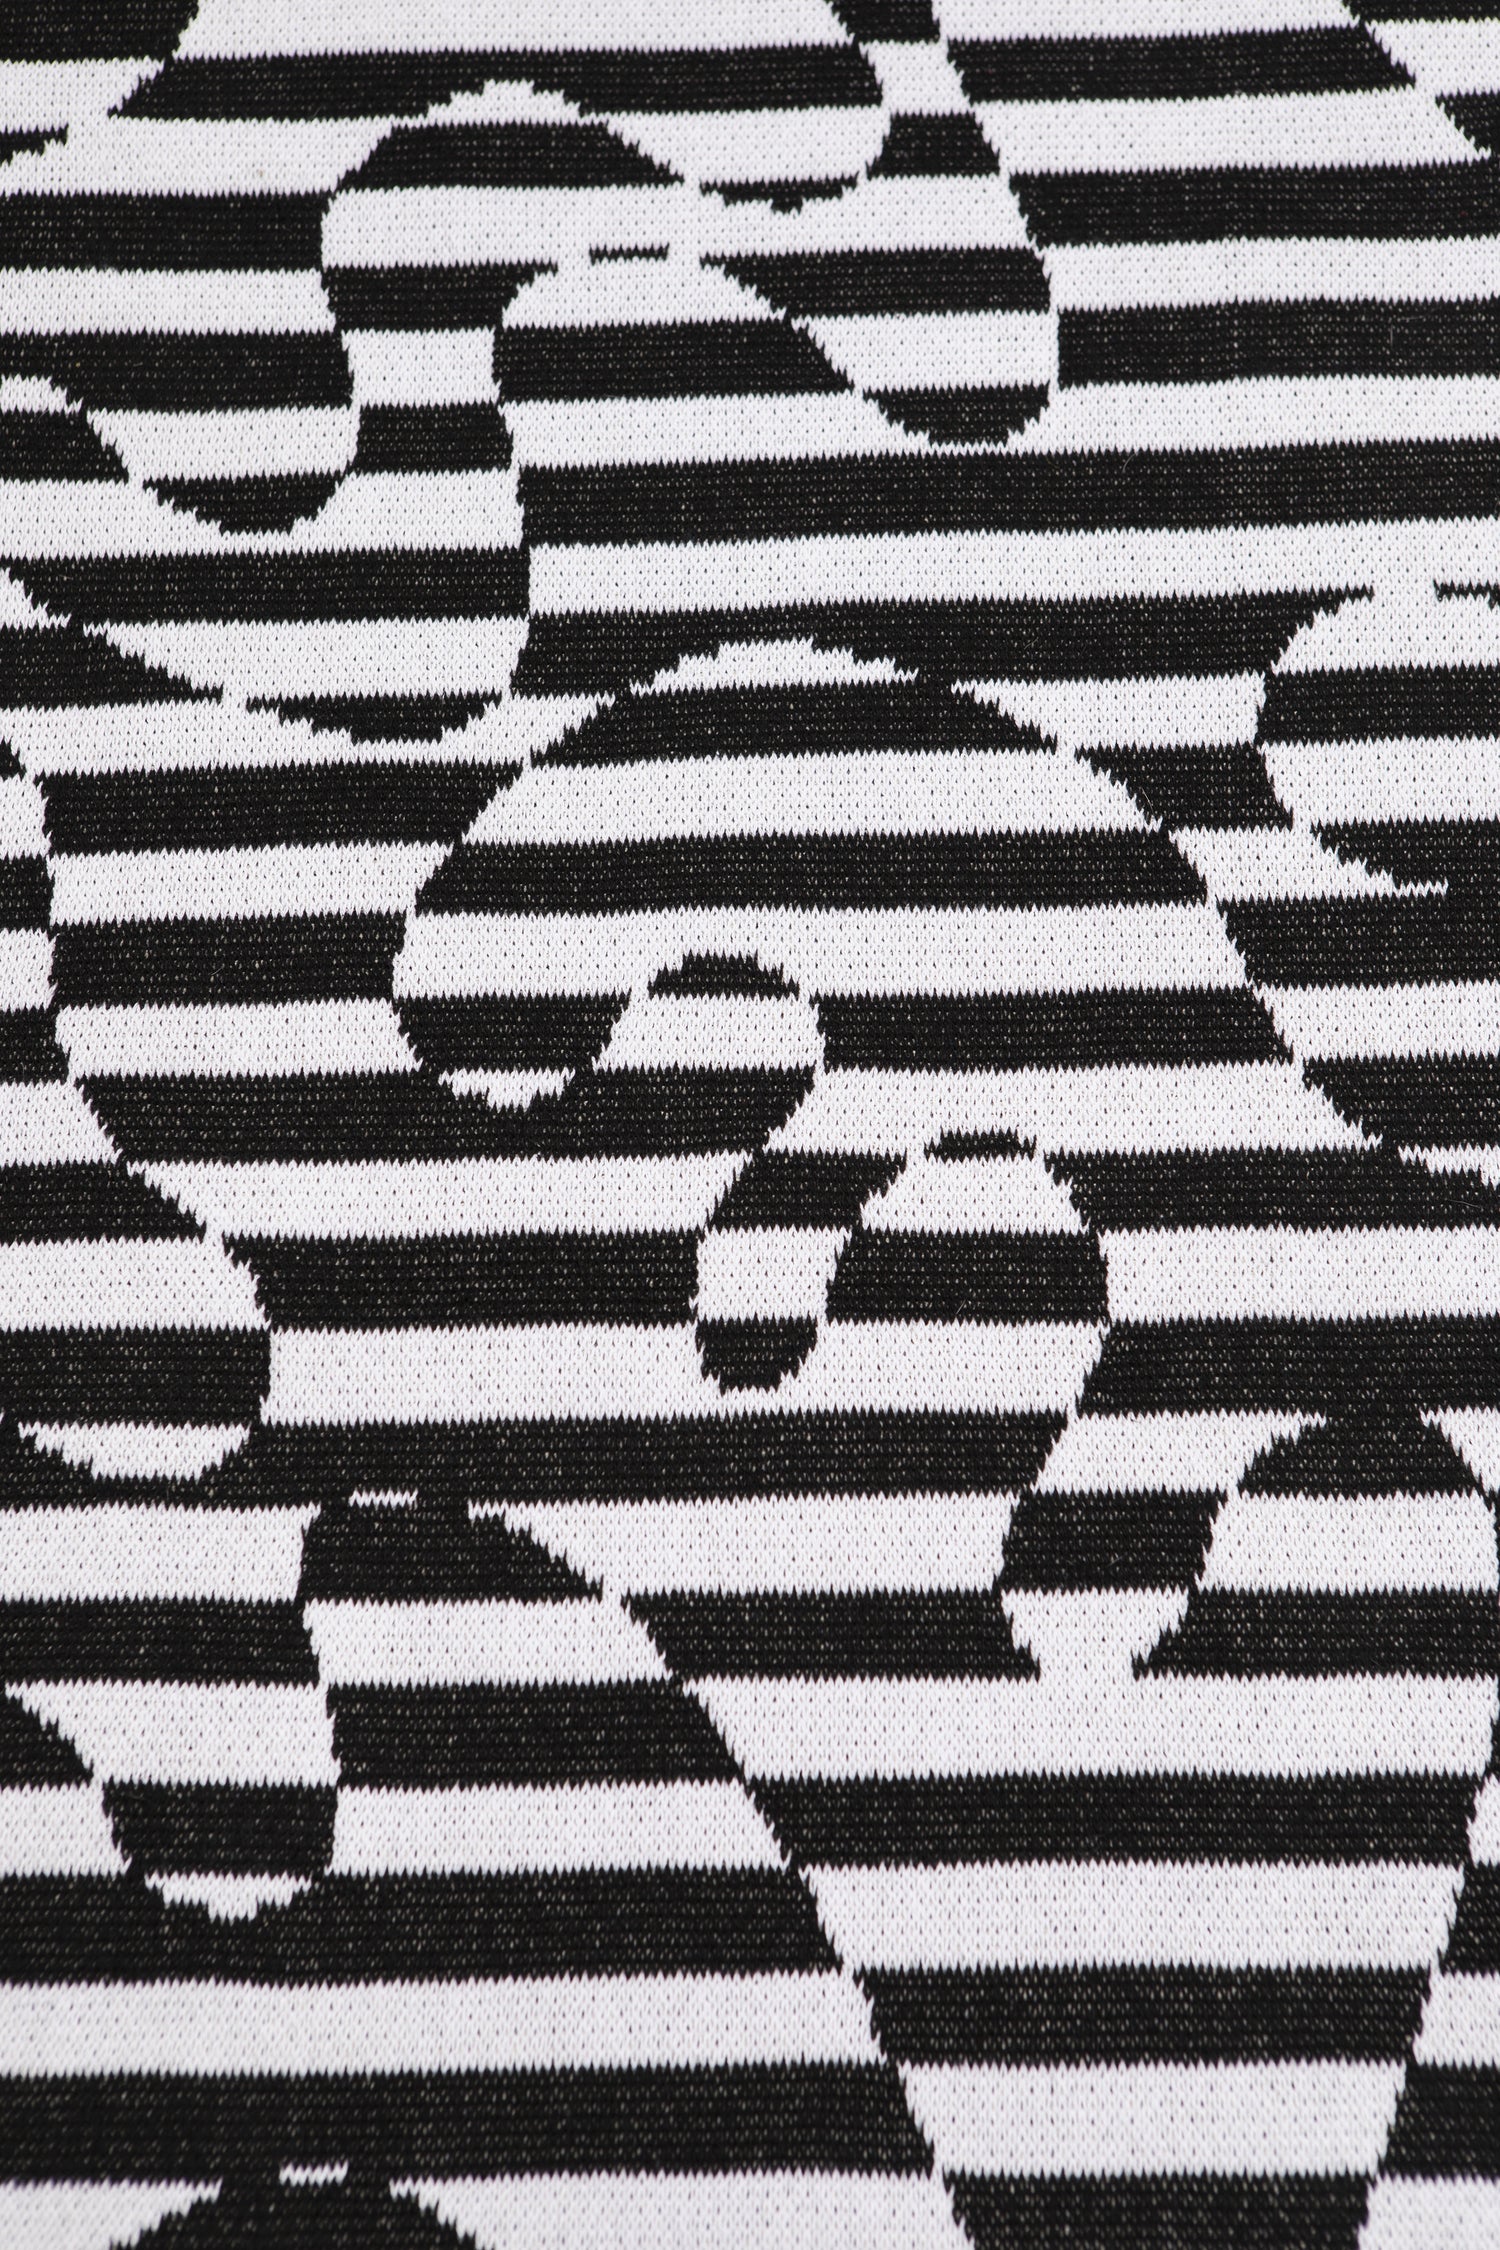 Close up of Dazzle Blanket showing the black and white striped swirl pattern.